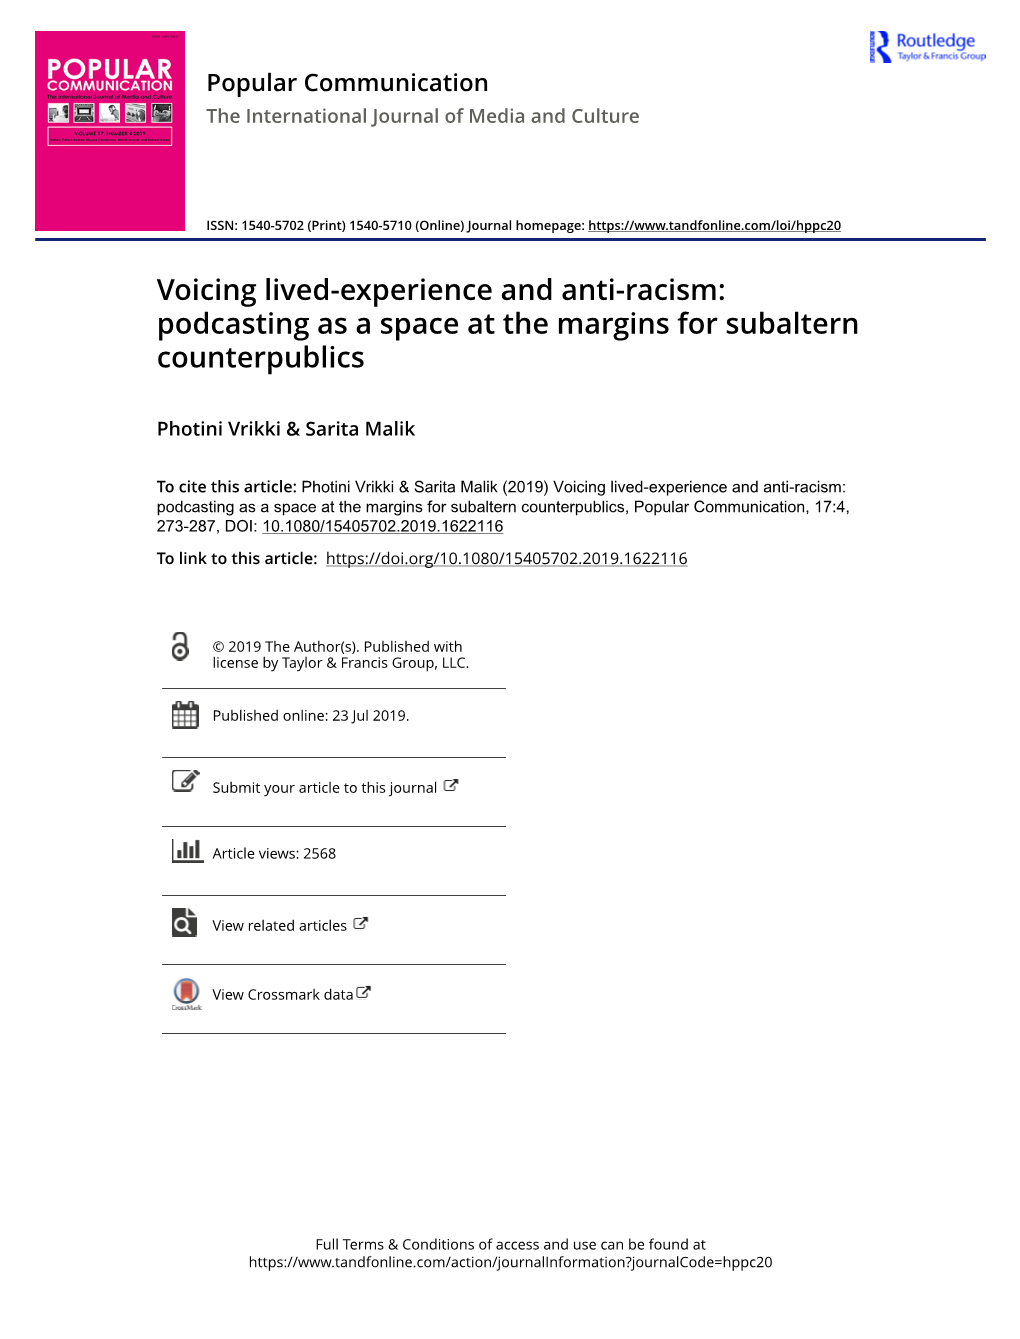 Voicing Lived-Experience and Anti-Racism: Podcasting As a Space at the Margins for Subaltern Counterpublics